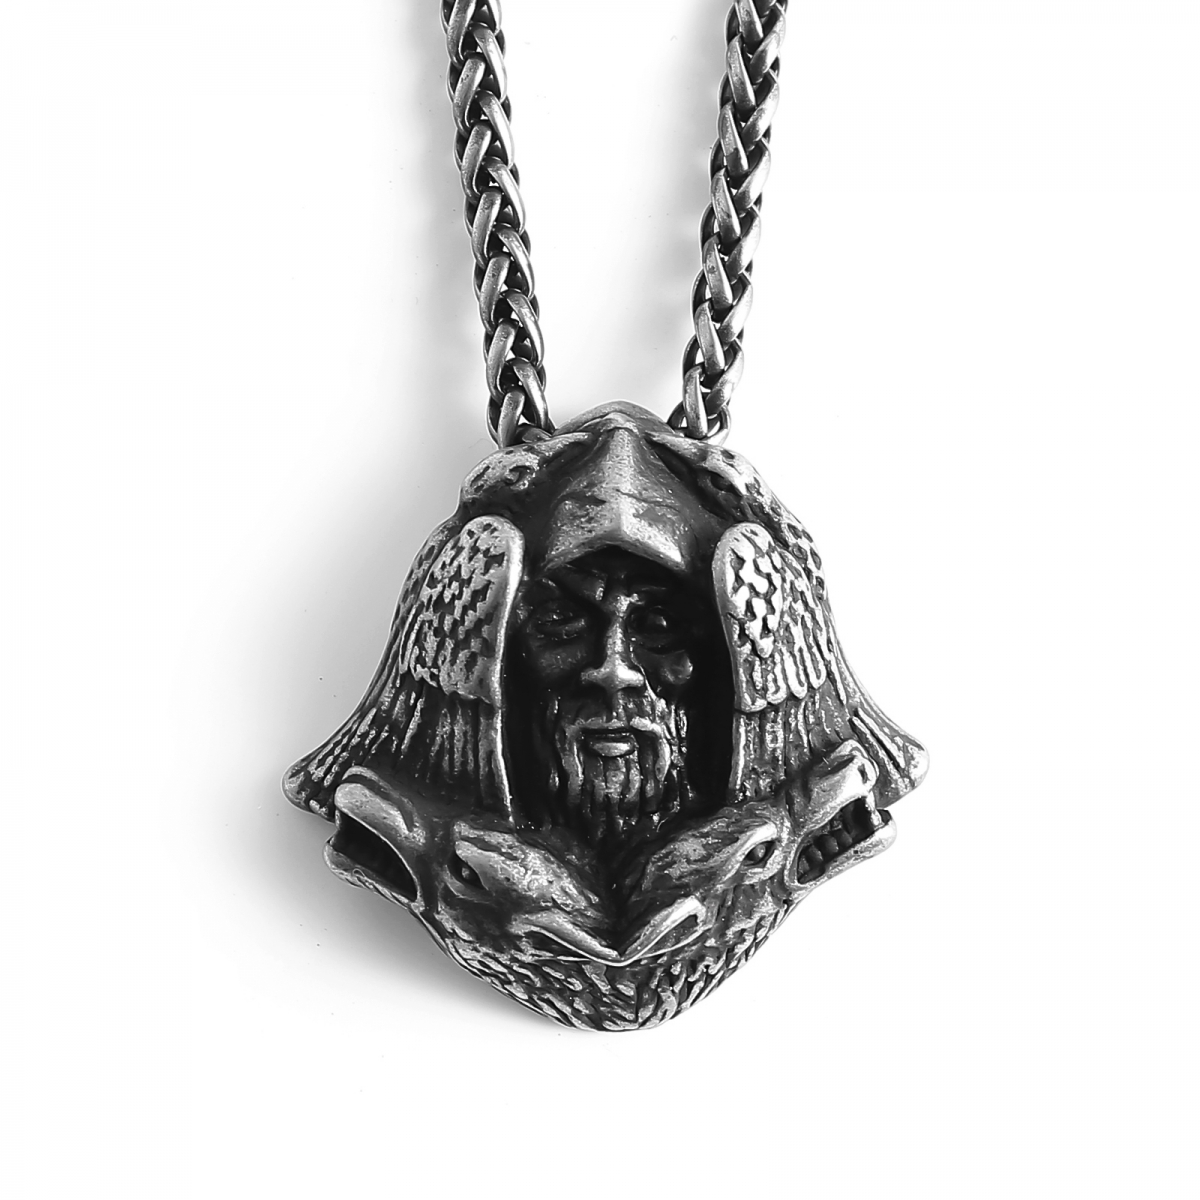 Odin Necklace Antique US$3.2/PC-NORSECOLLECTION- Viking Jewelry,Viking Necklace,Viking Bracelet,Viking Rings,Viking Mugs,Viking Accessories,Viking Crafts